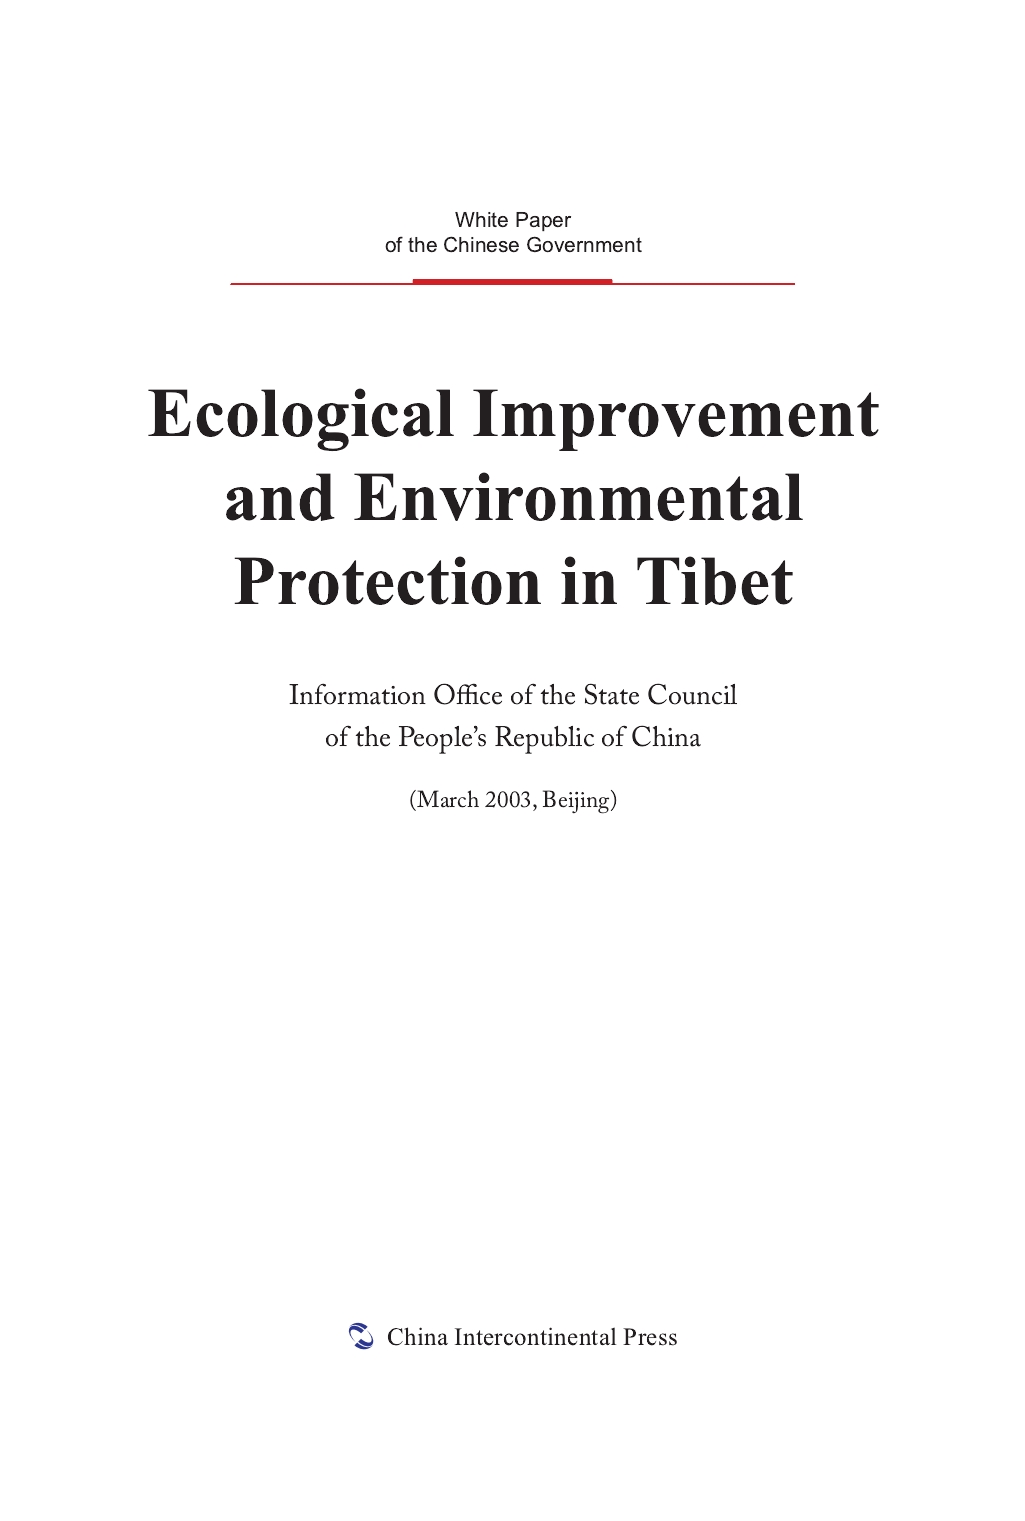 Ecological Improvement and Environmental Protection in Tibet